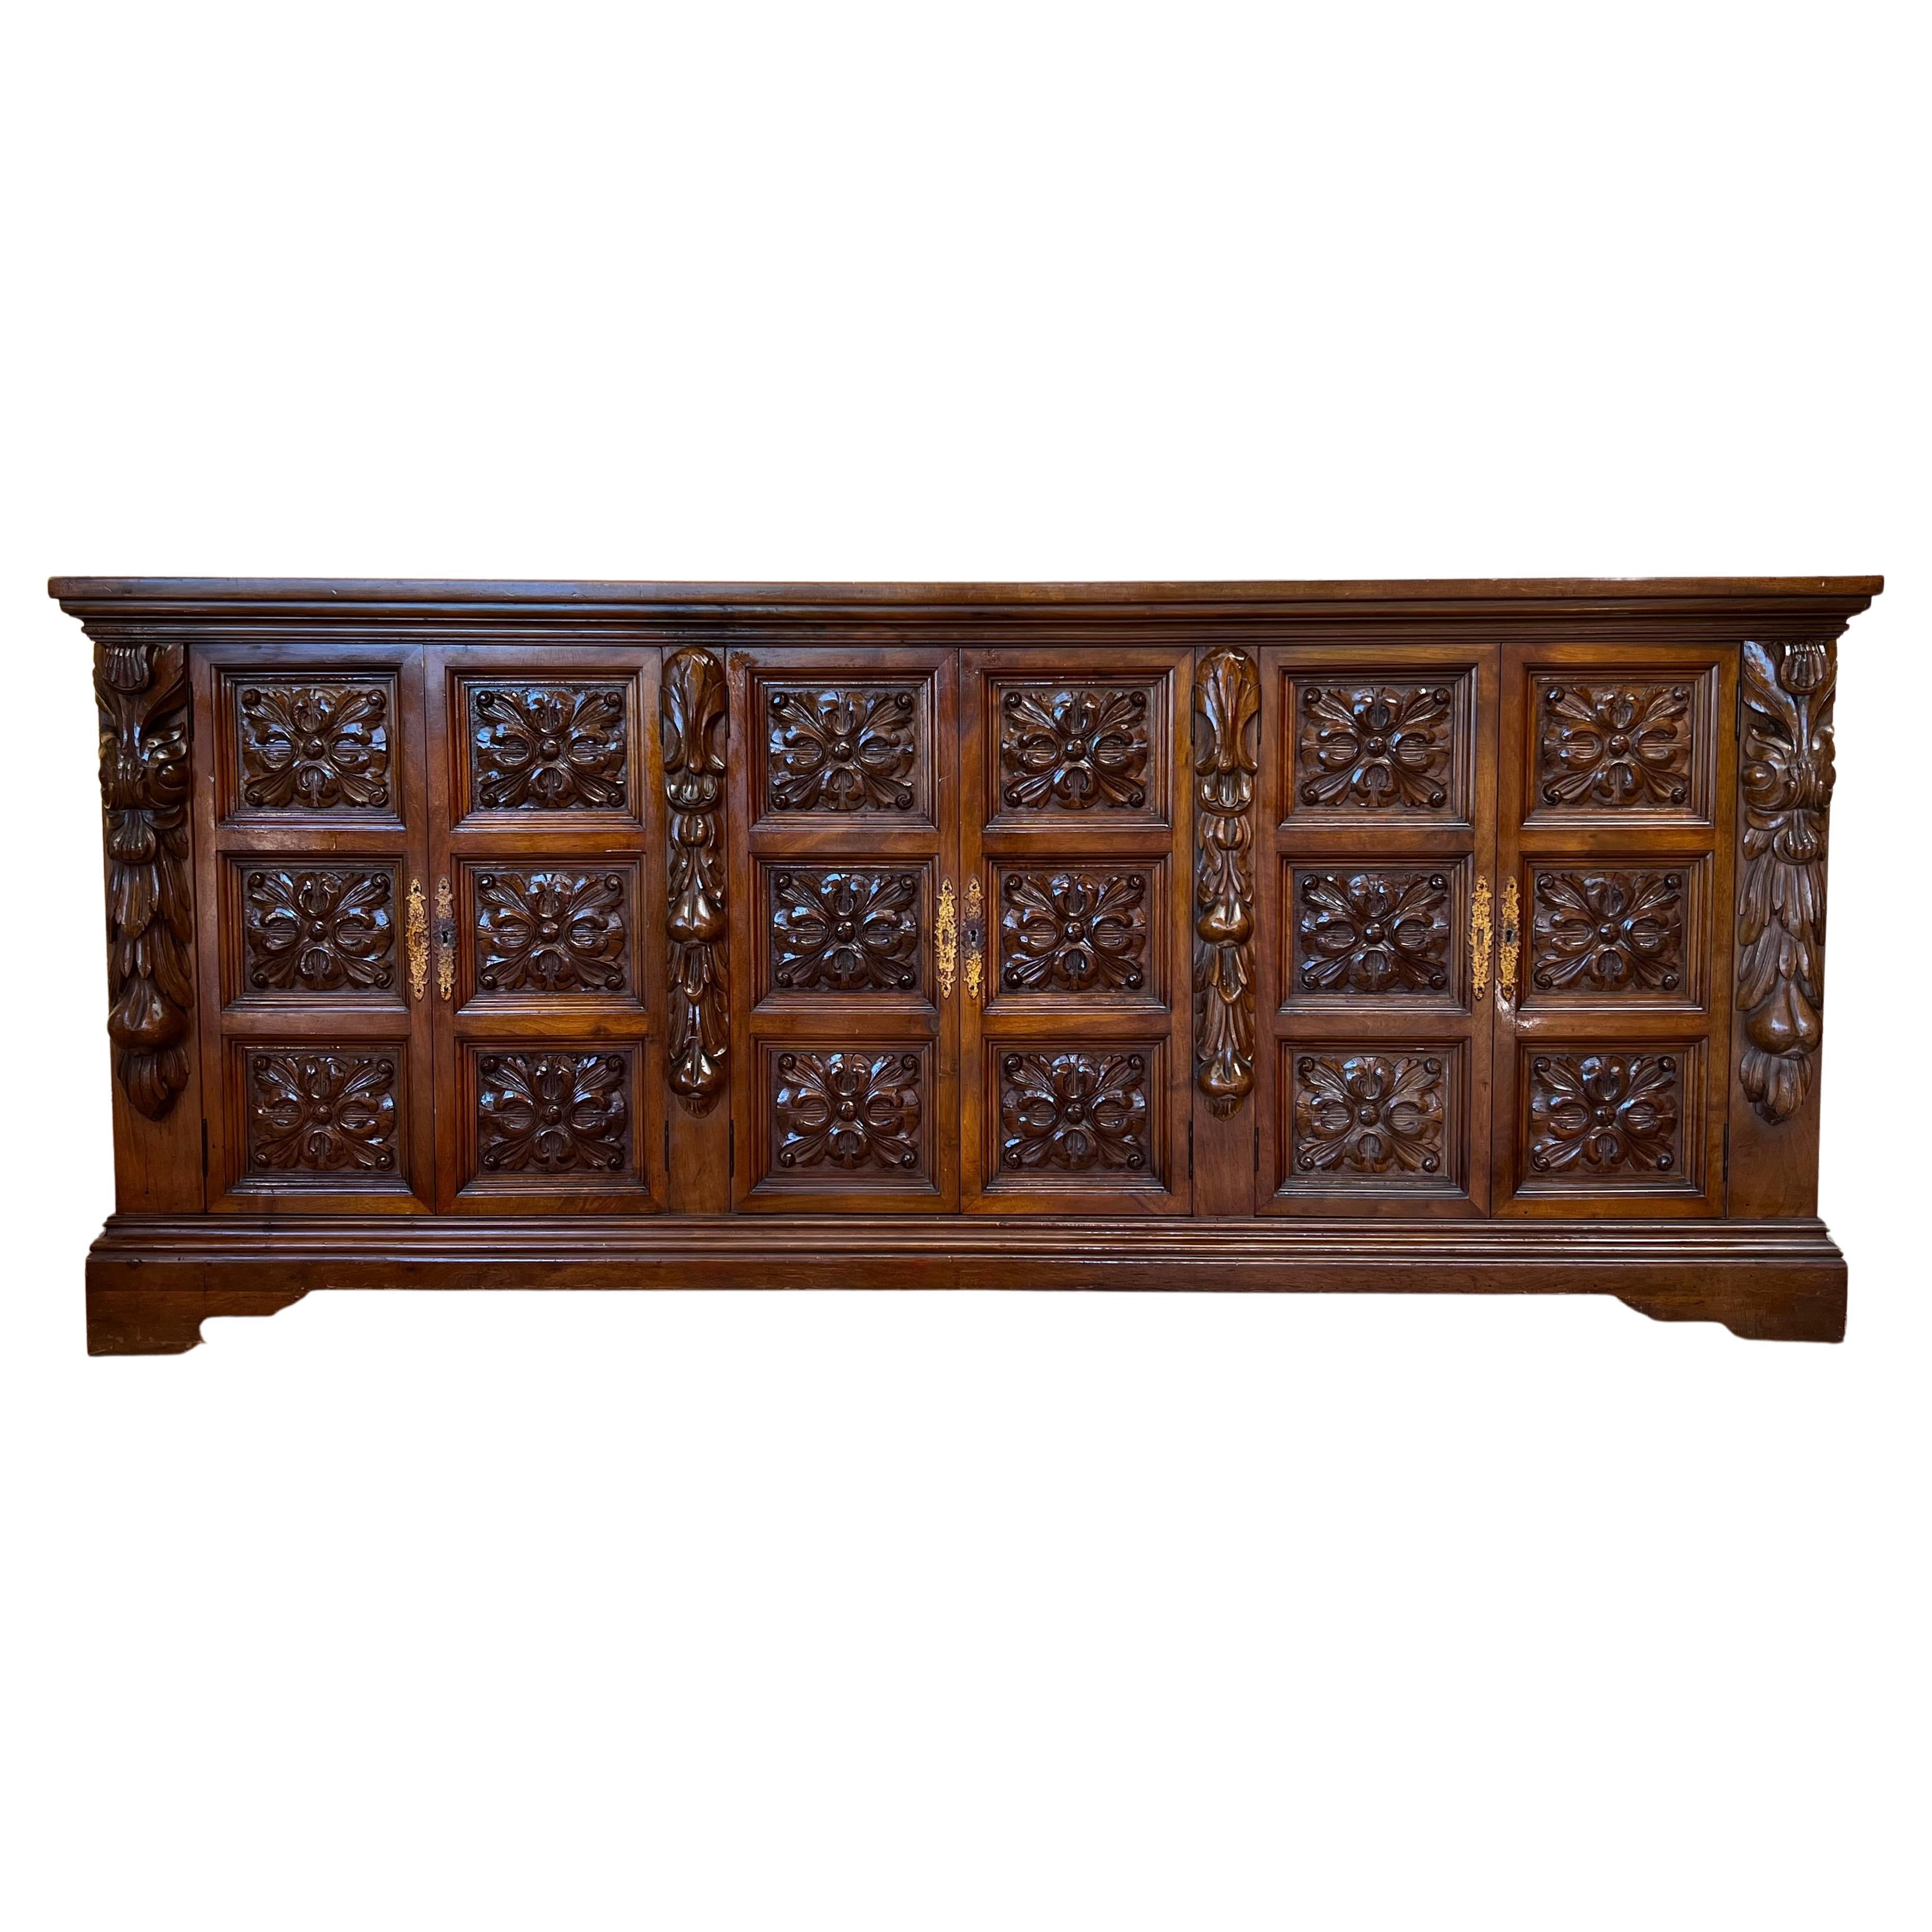 Antique Spanish Carved Walnut Sideboard with Florals Reliefs, circa 1870-1880 For Sale